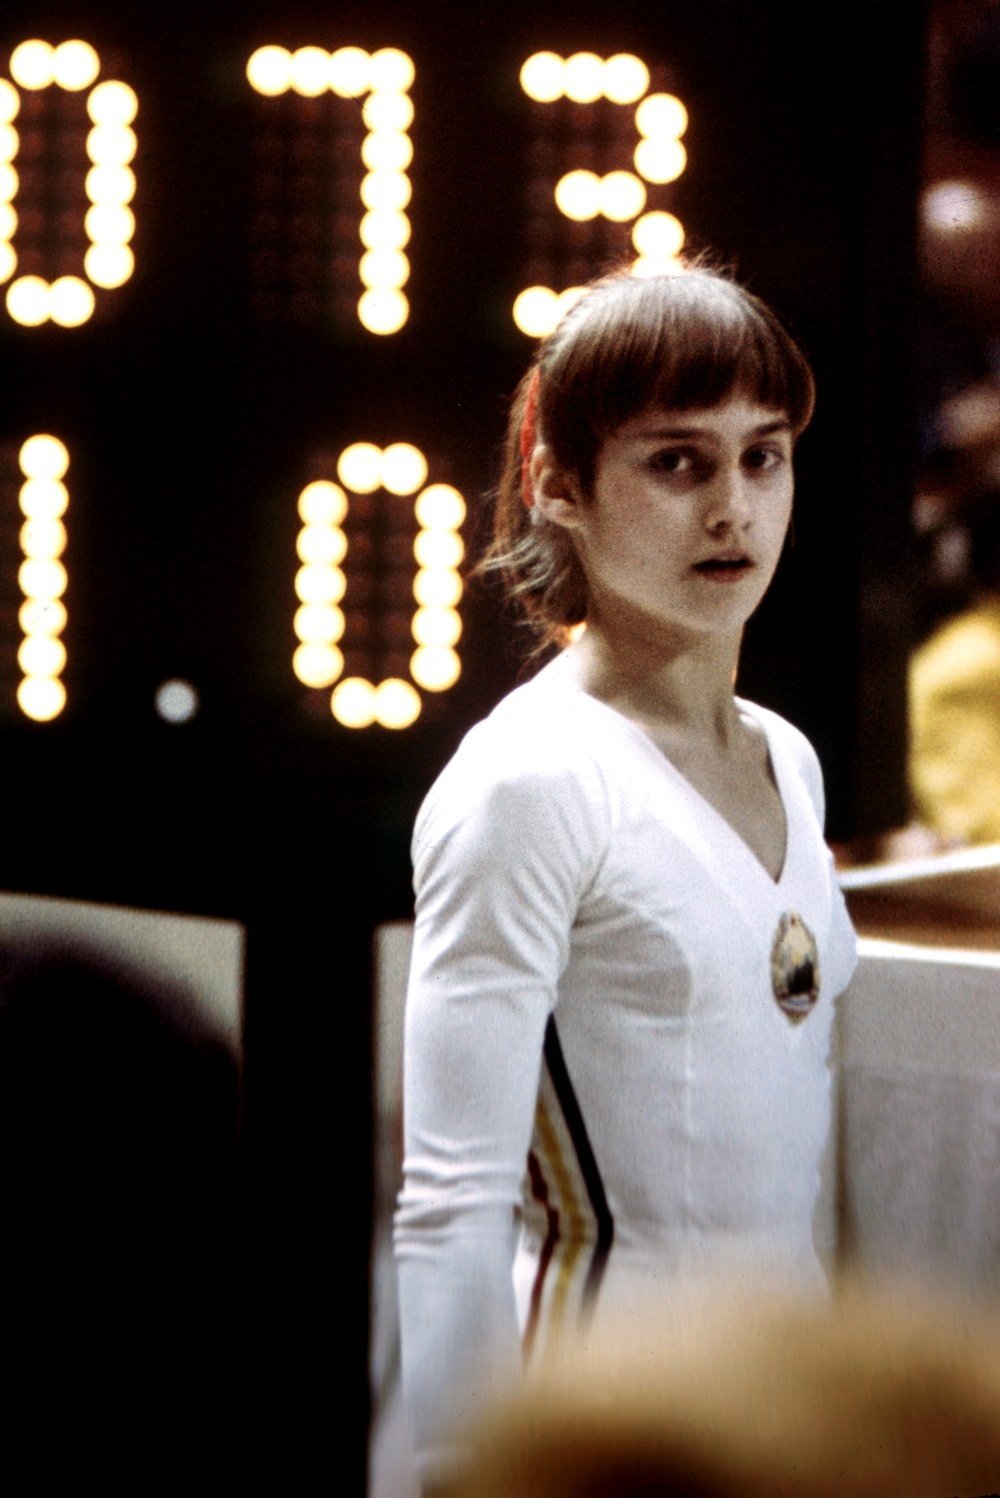 Picture taken 23 July 1976 of Rumanian champion Nadia Comaneci, aged 14, during Olympic Games in Montreal where she was awarded with ten points in two exercices and captured 3 gold medals (beam, uneven bars and general competition). Legendary gymnast, during her career Nadia Comaneci captured four Olympic gold medals (1976 :  beam, uneven bars and general competition - 1980, beam) and was the first to score 10 in her discipline.  (Photo credit should read STAFF/AFP via Getty Images)